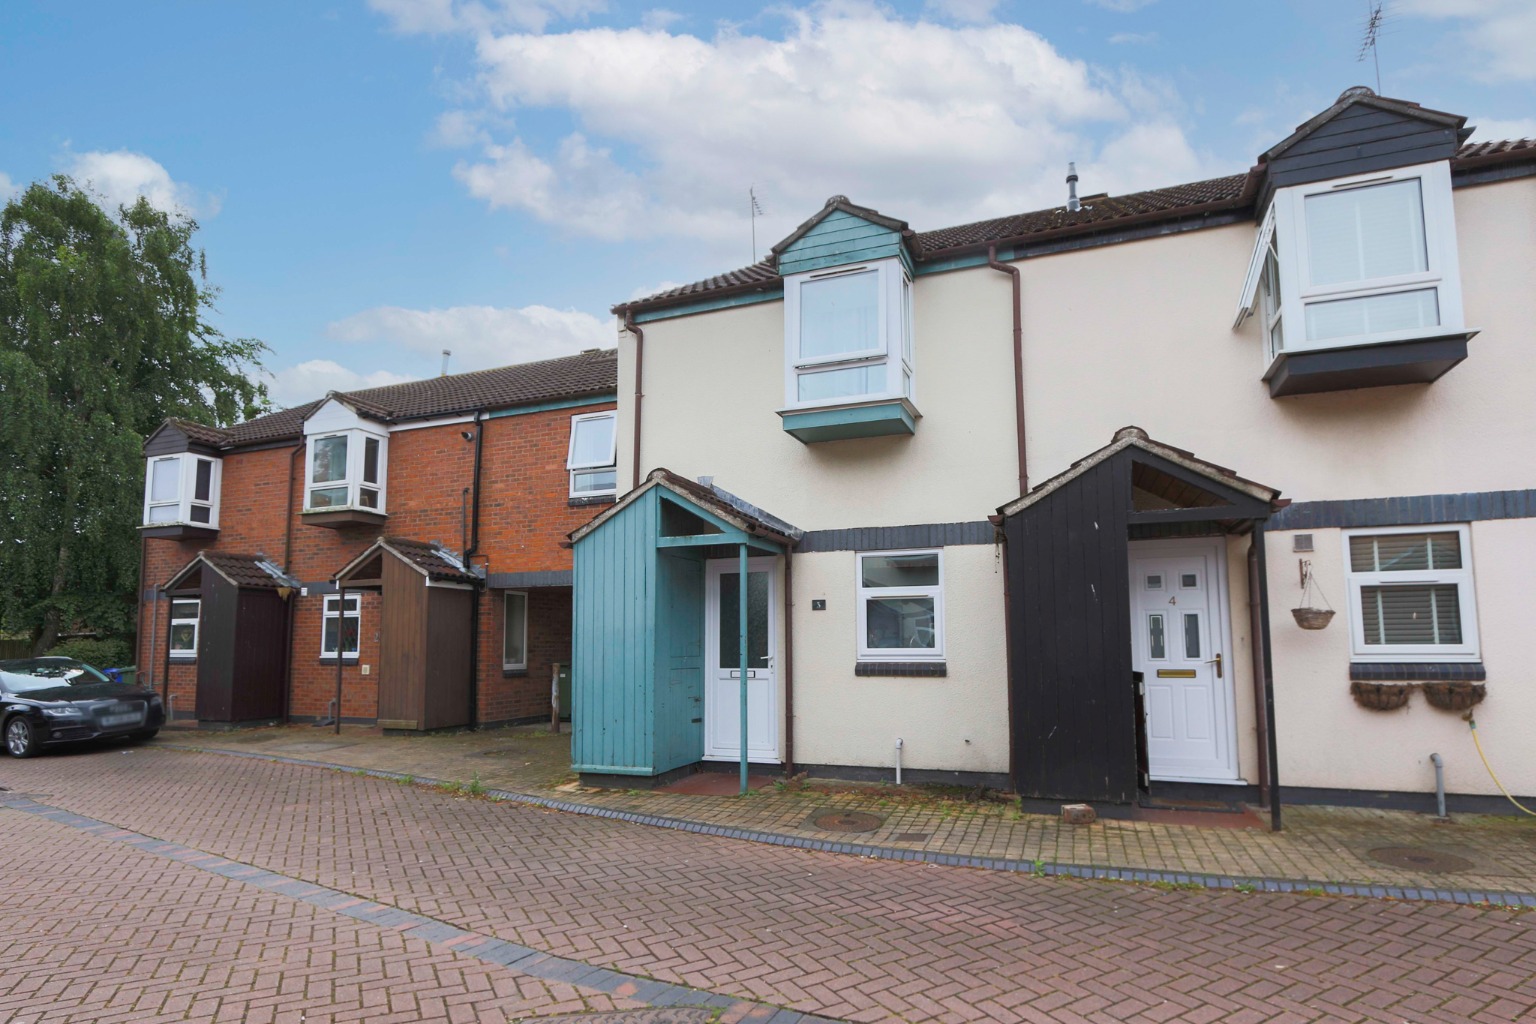 3 bed terraced house for sale in Godbold Close, Beverley, HU17